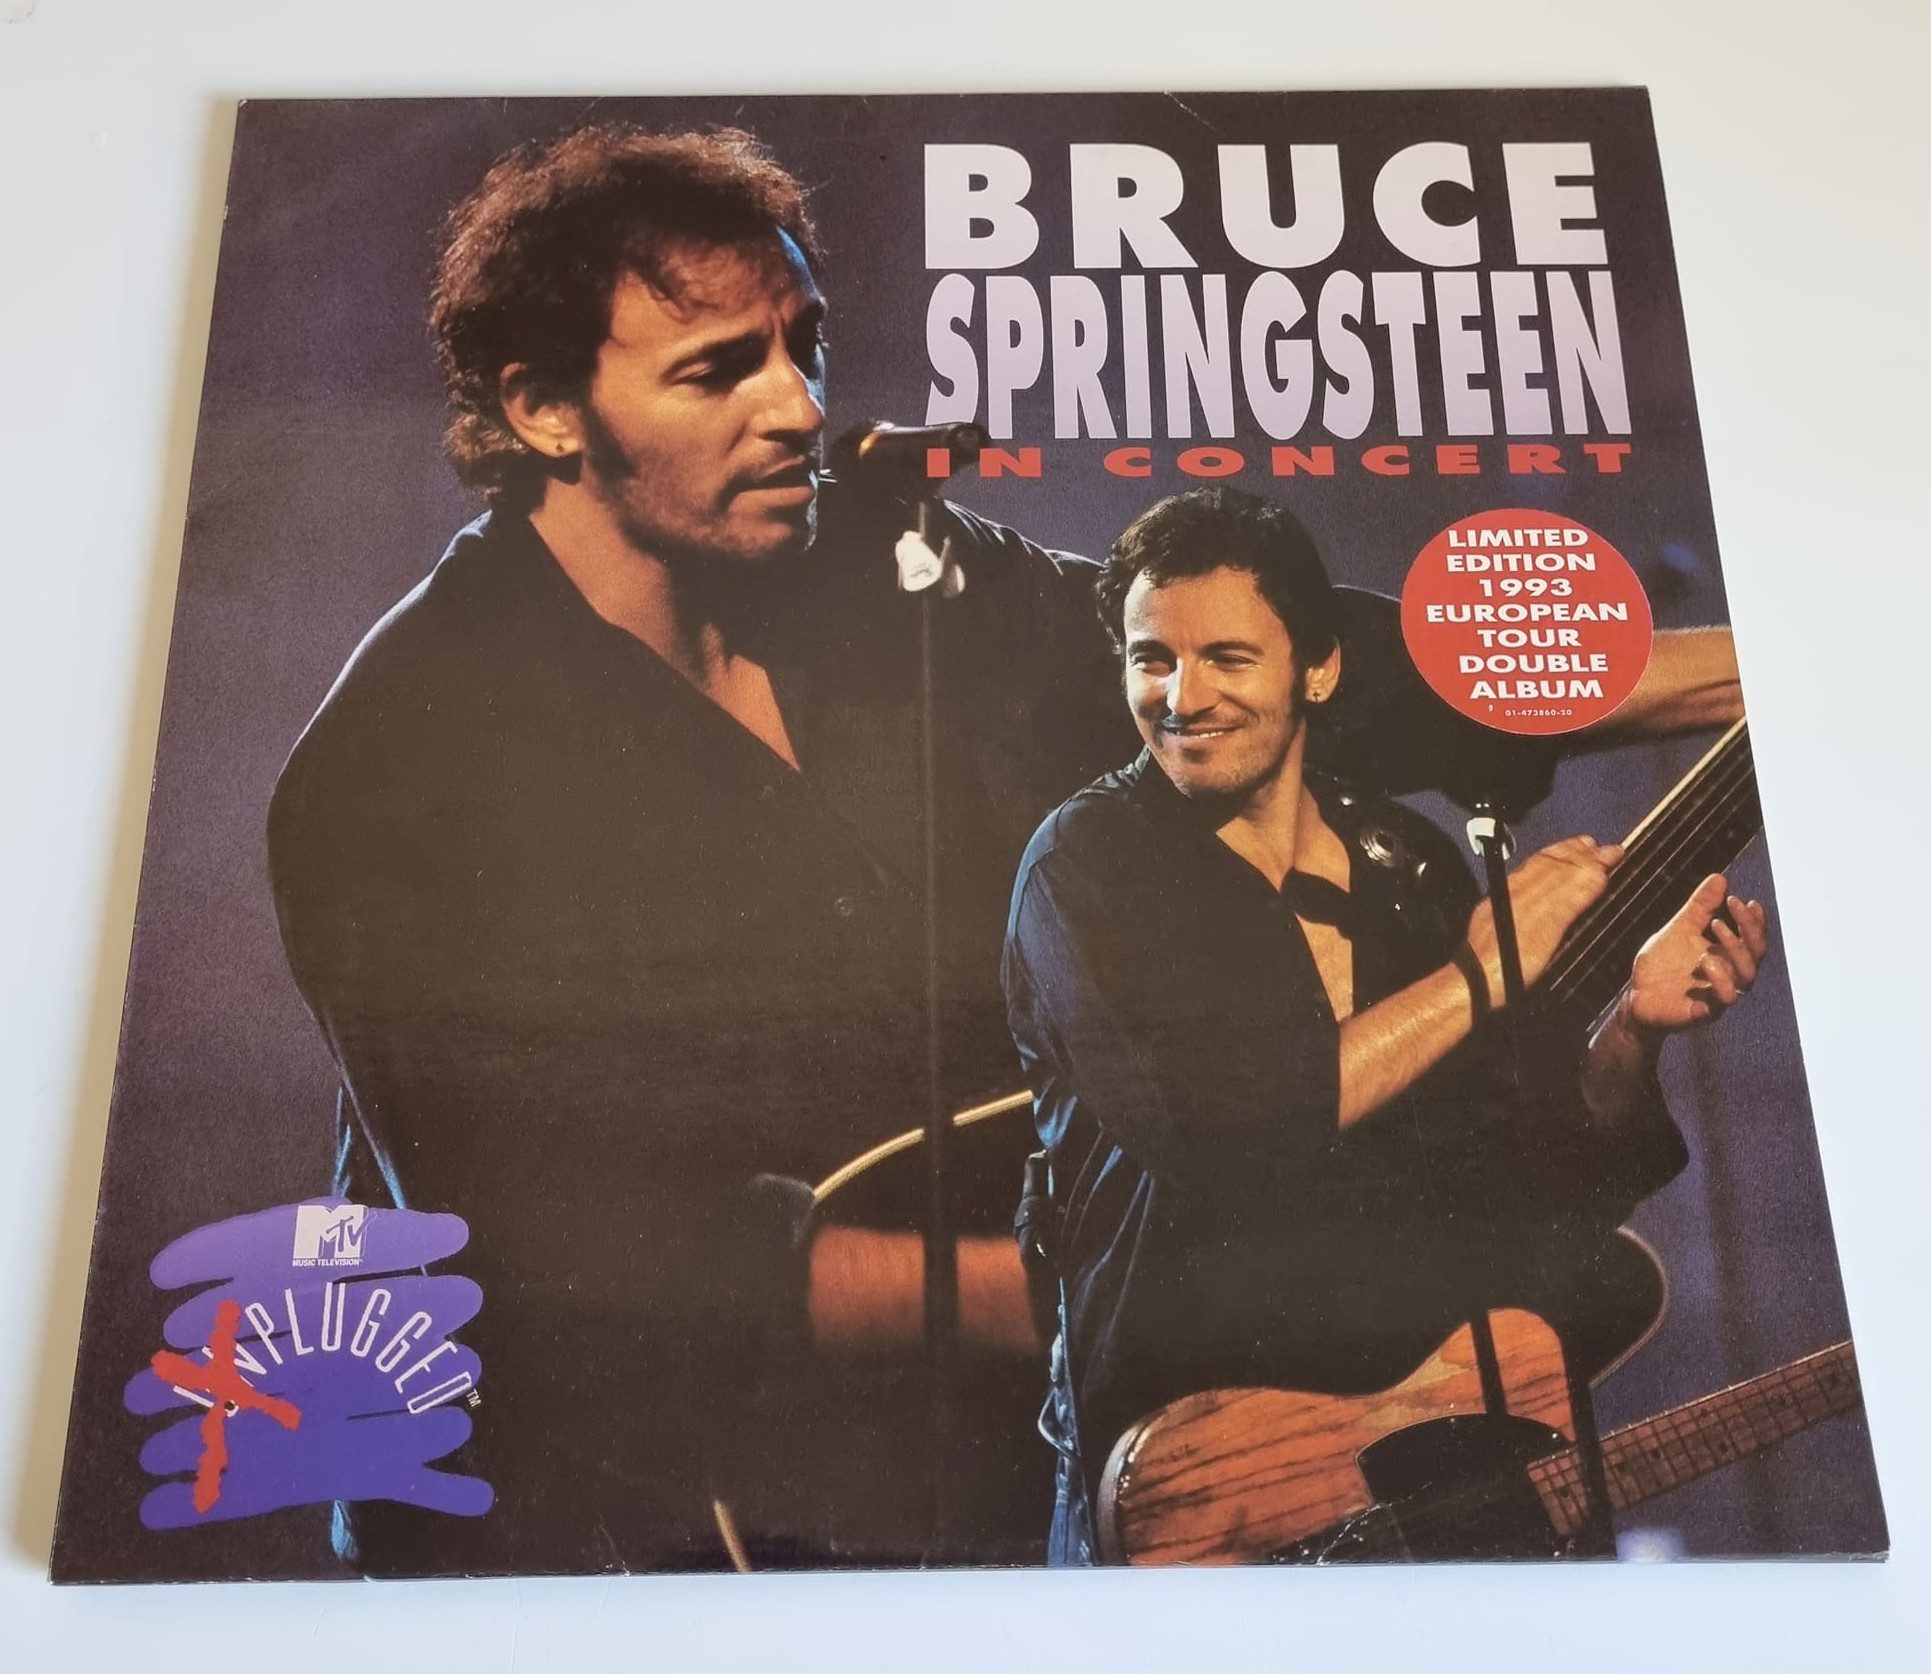 Buy this rare Bruce Springsteen record by clicking here